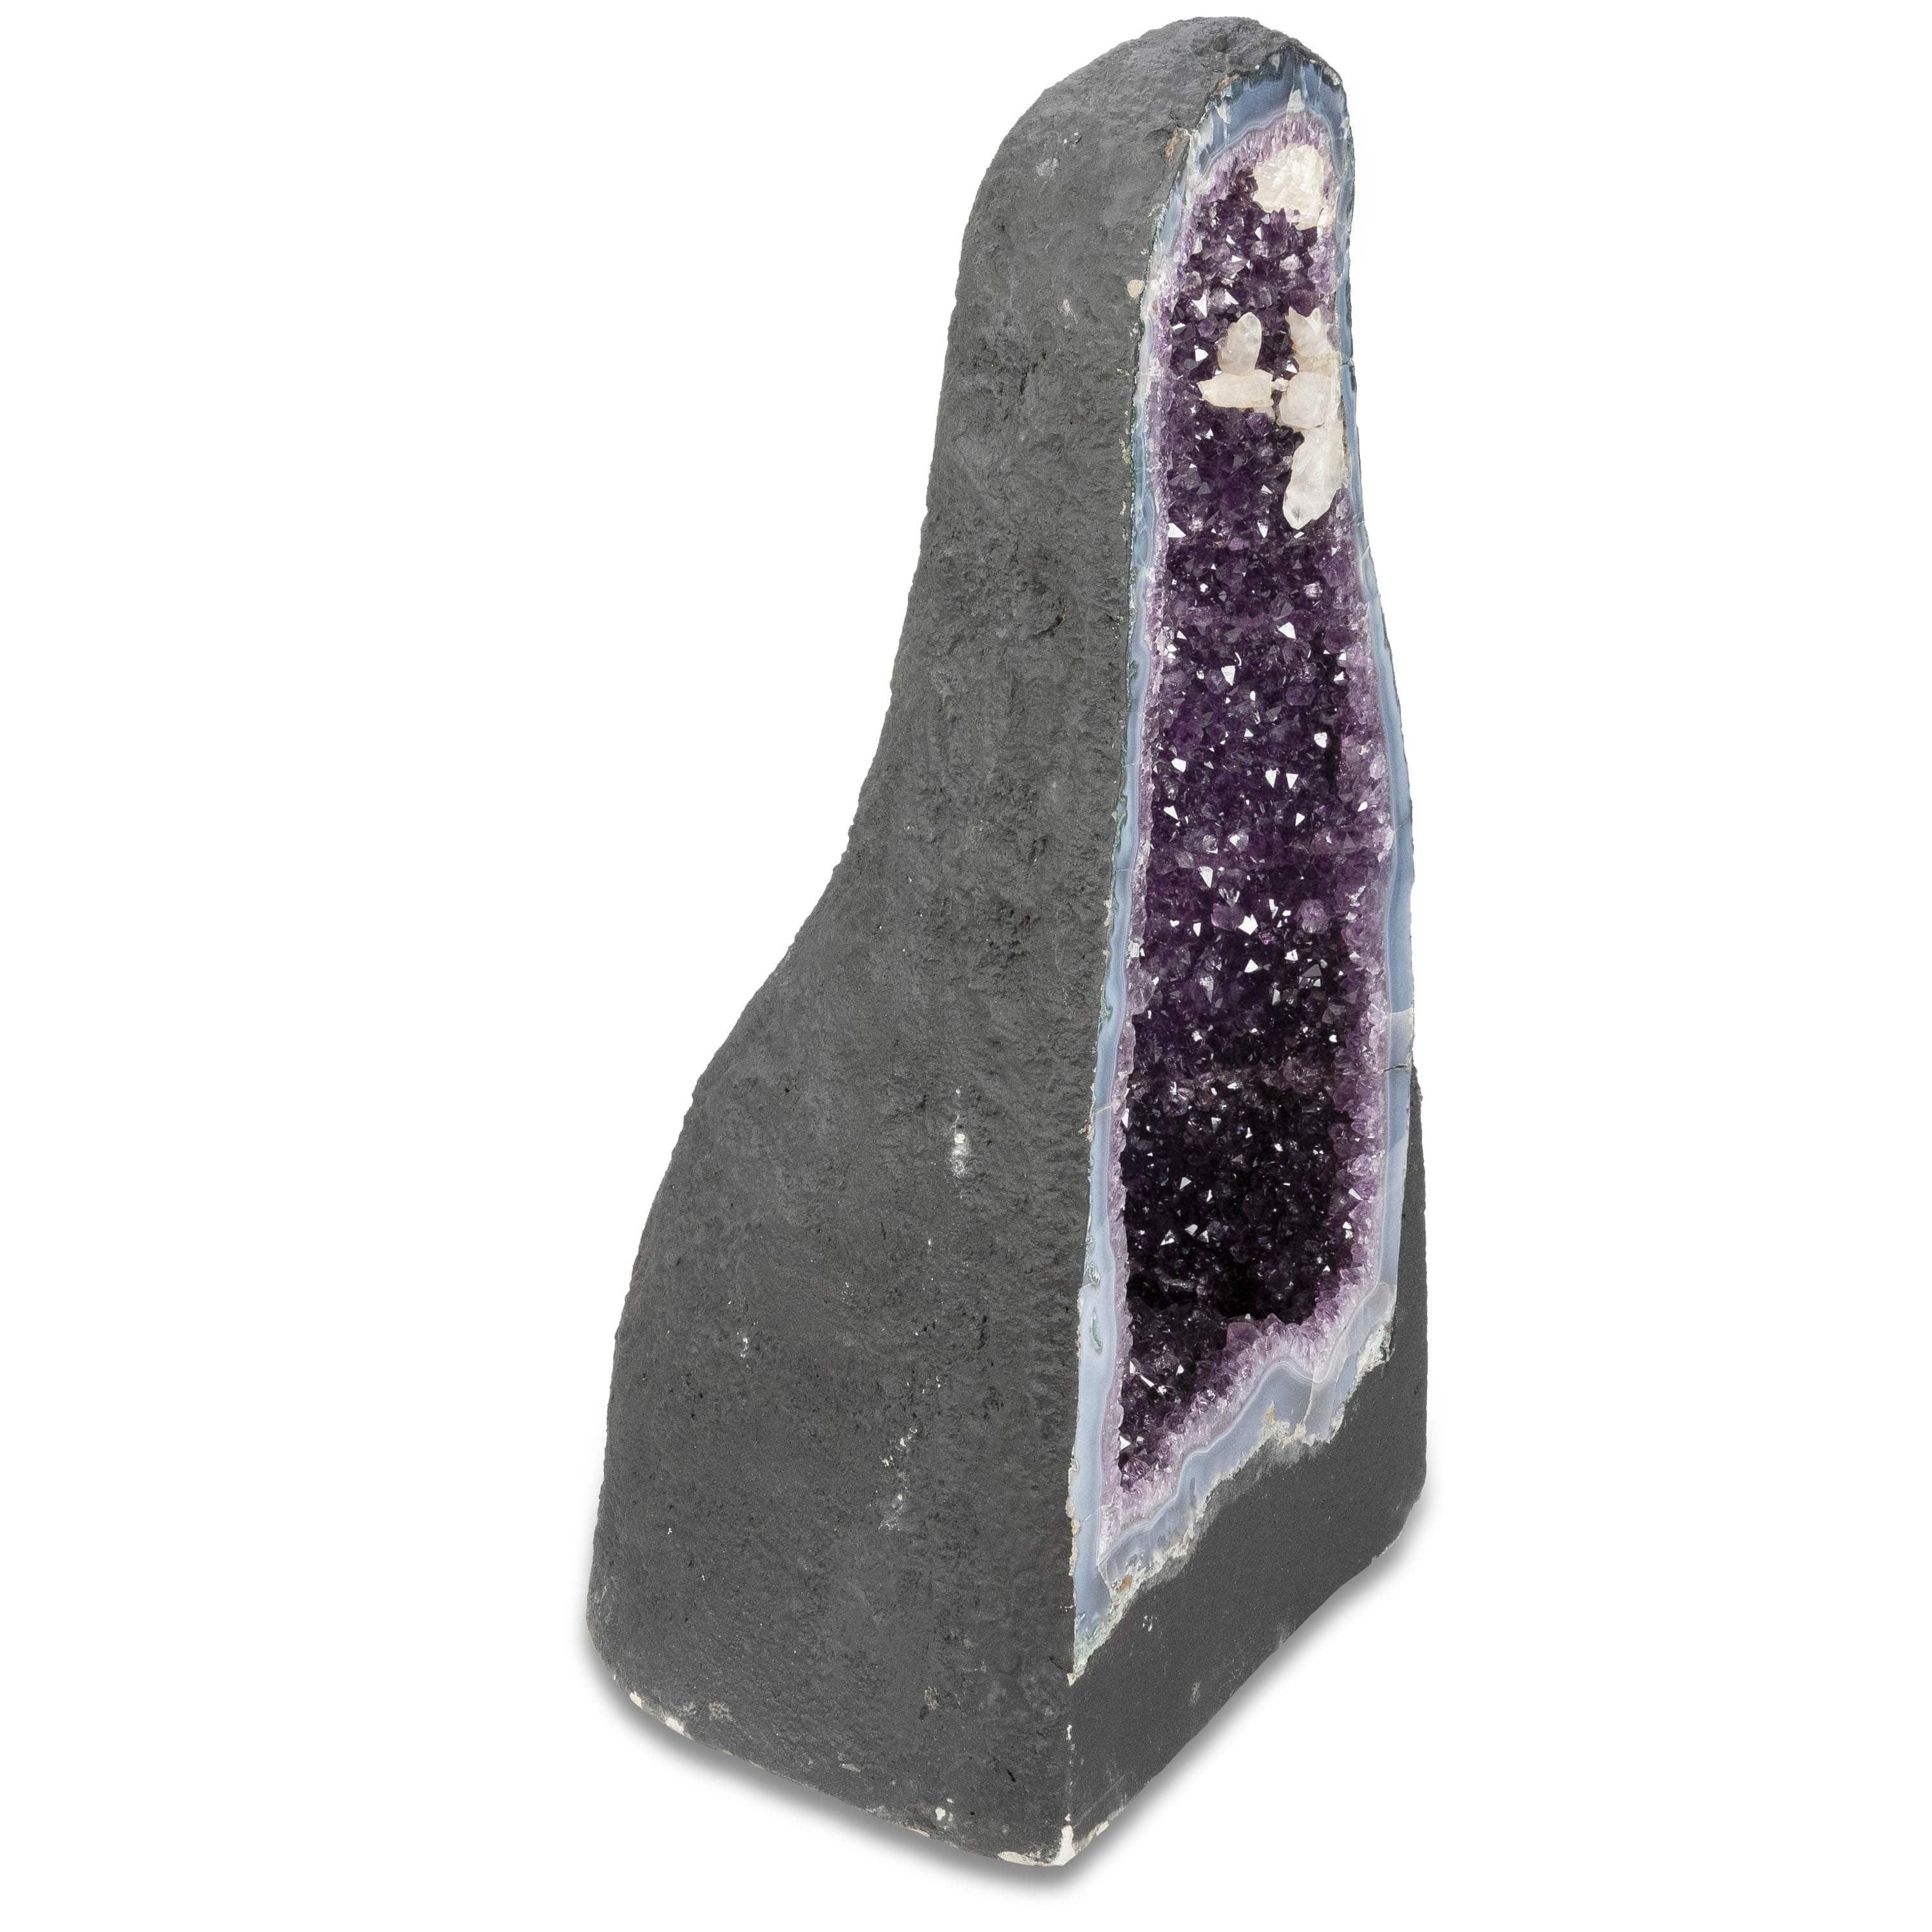 Kalifano Amethyst Amethyst Geode Cathedral - 27" / 119 lbs BAG18000.007